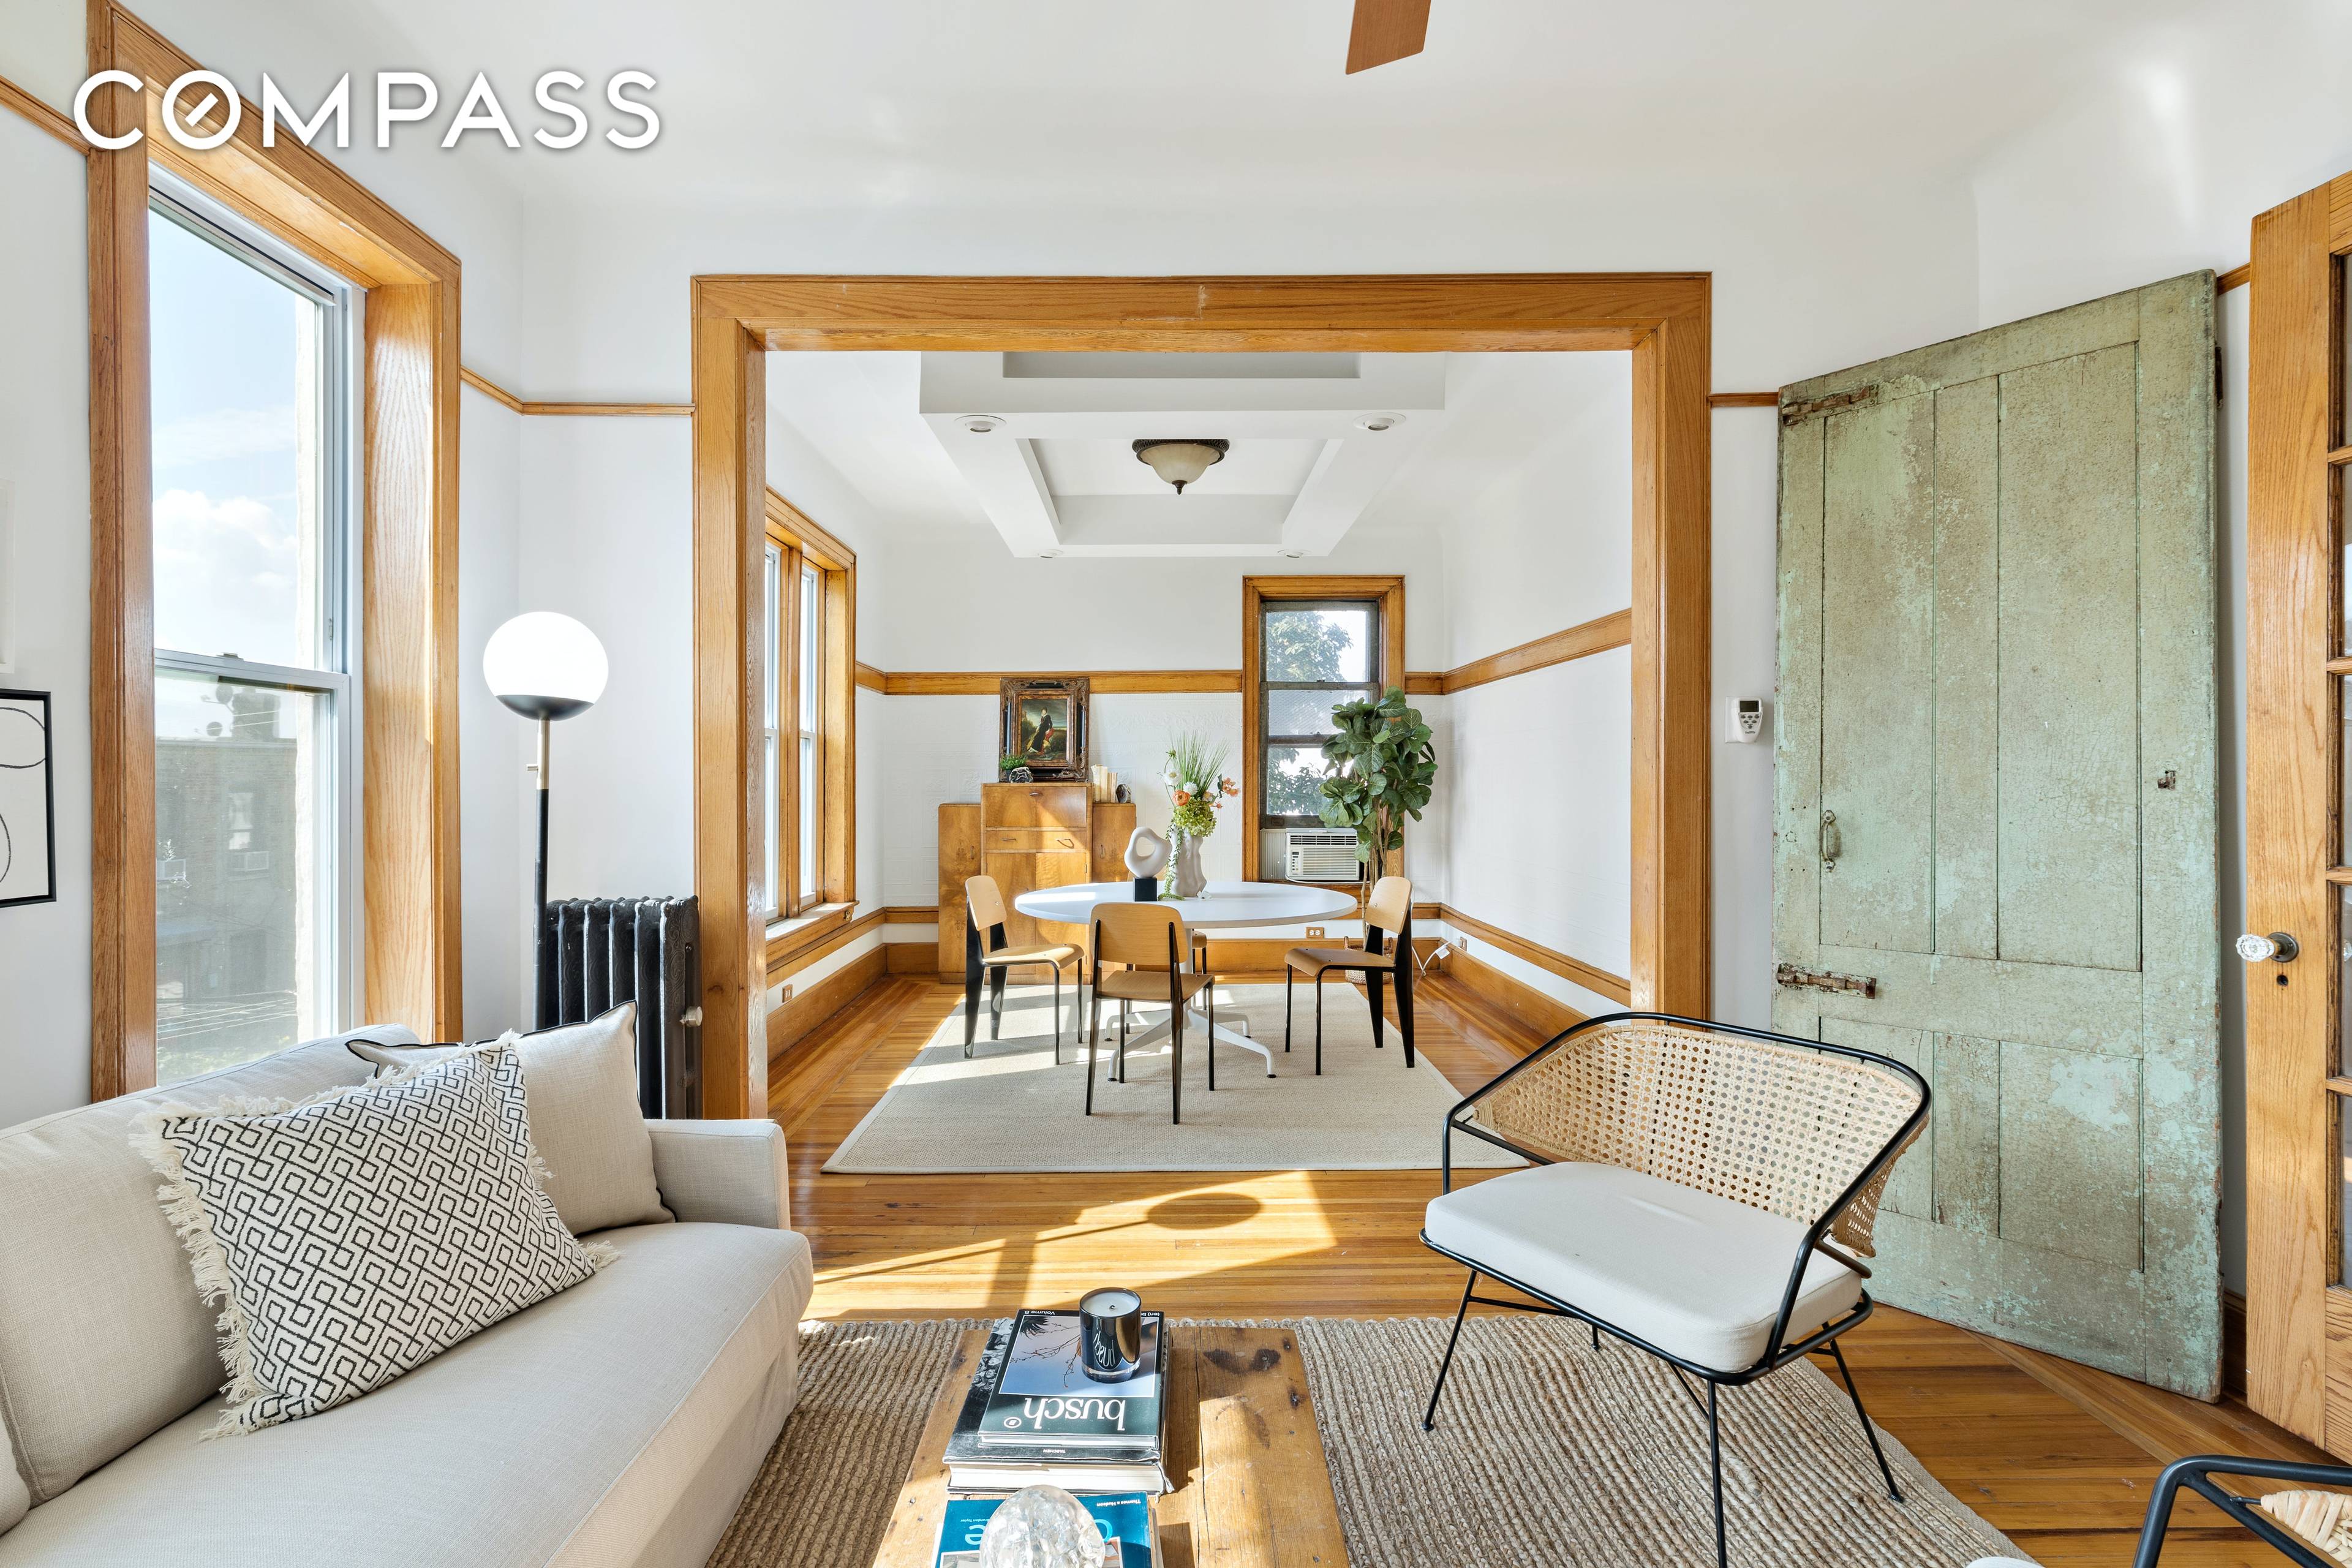 Elegant living awaits you in this rare and gracious prewar beauty in Sunset Park offering one bedroom, a full bath, and 750 square feet of richly detailed interiors.